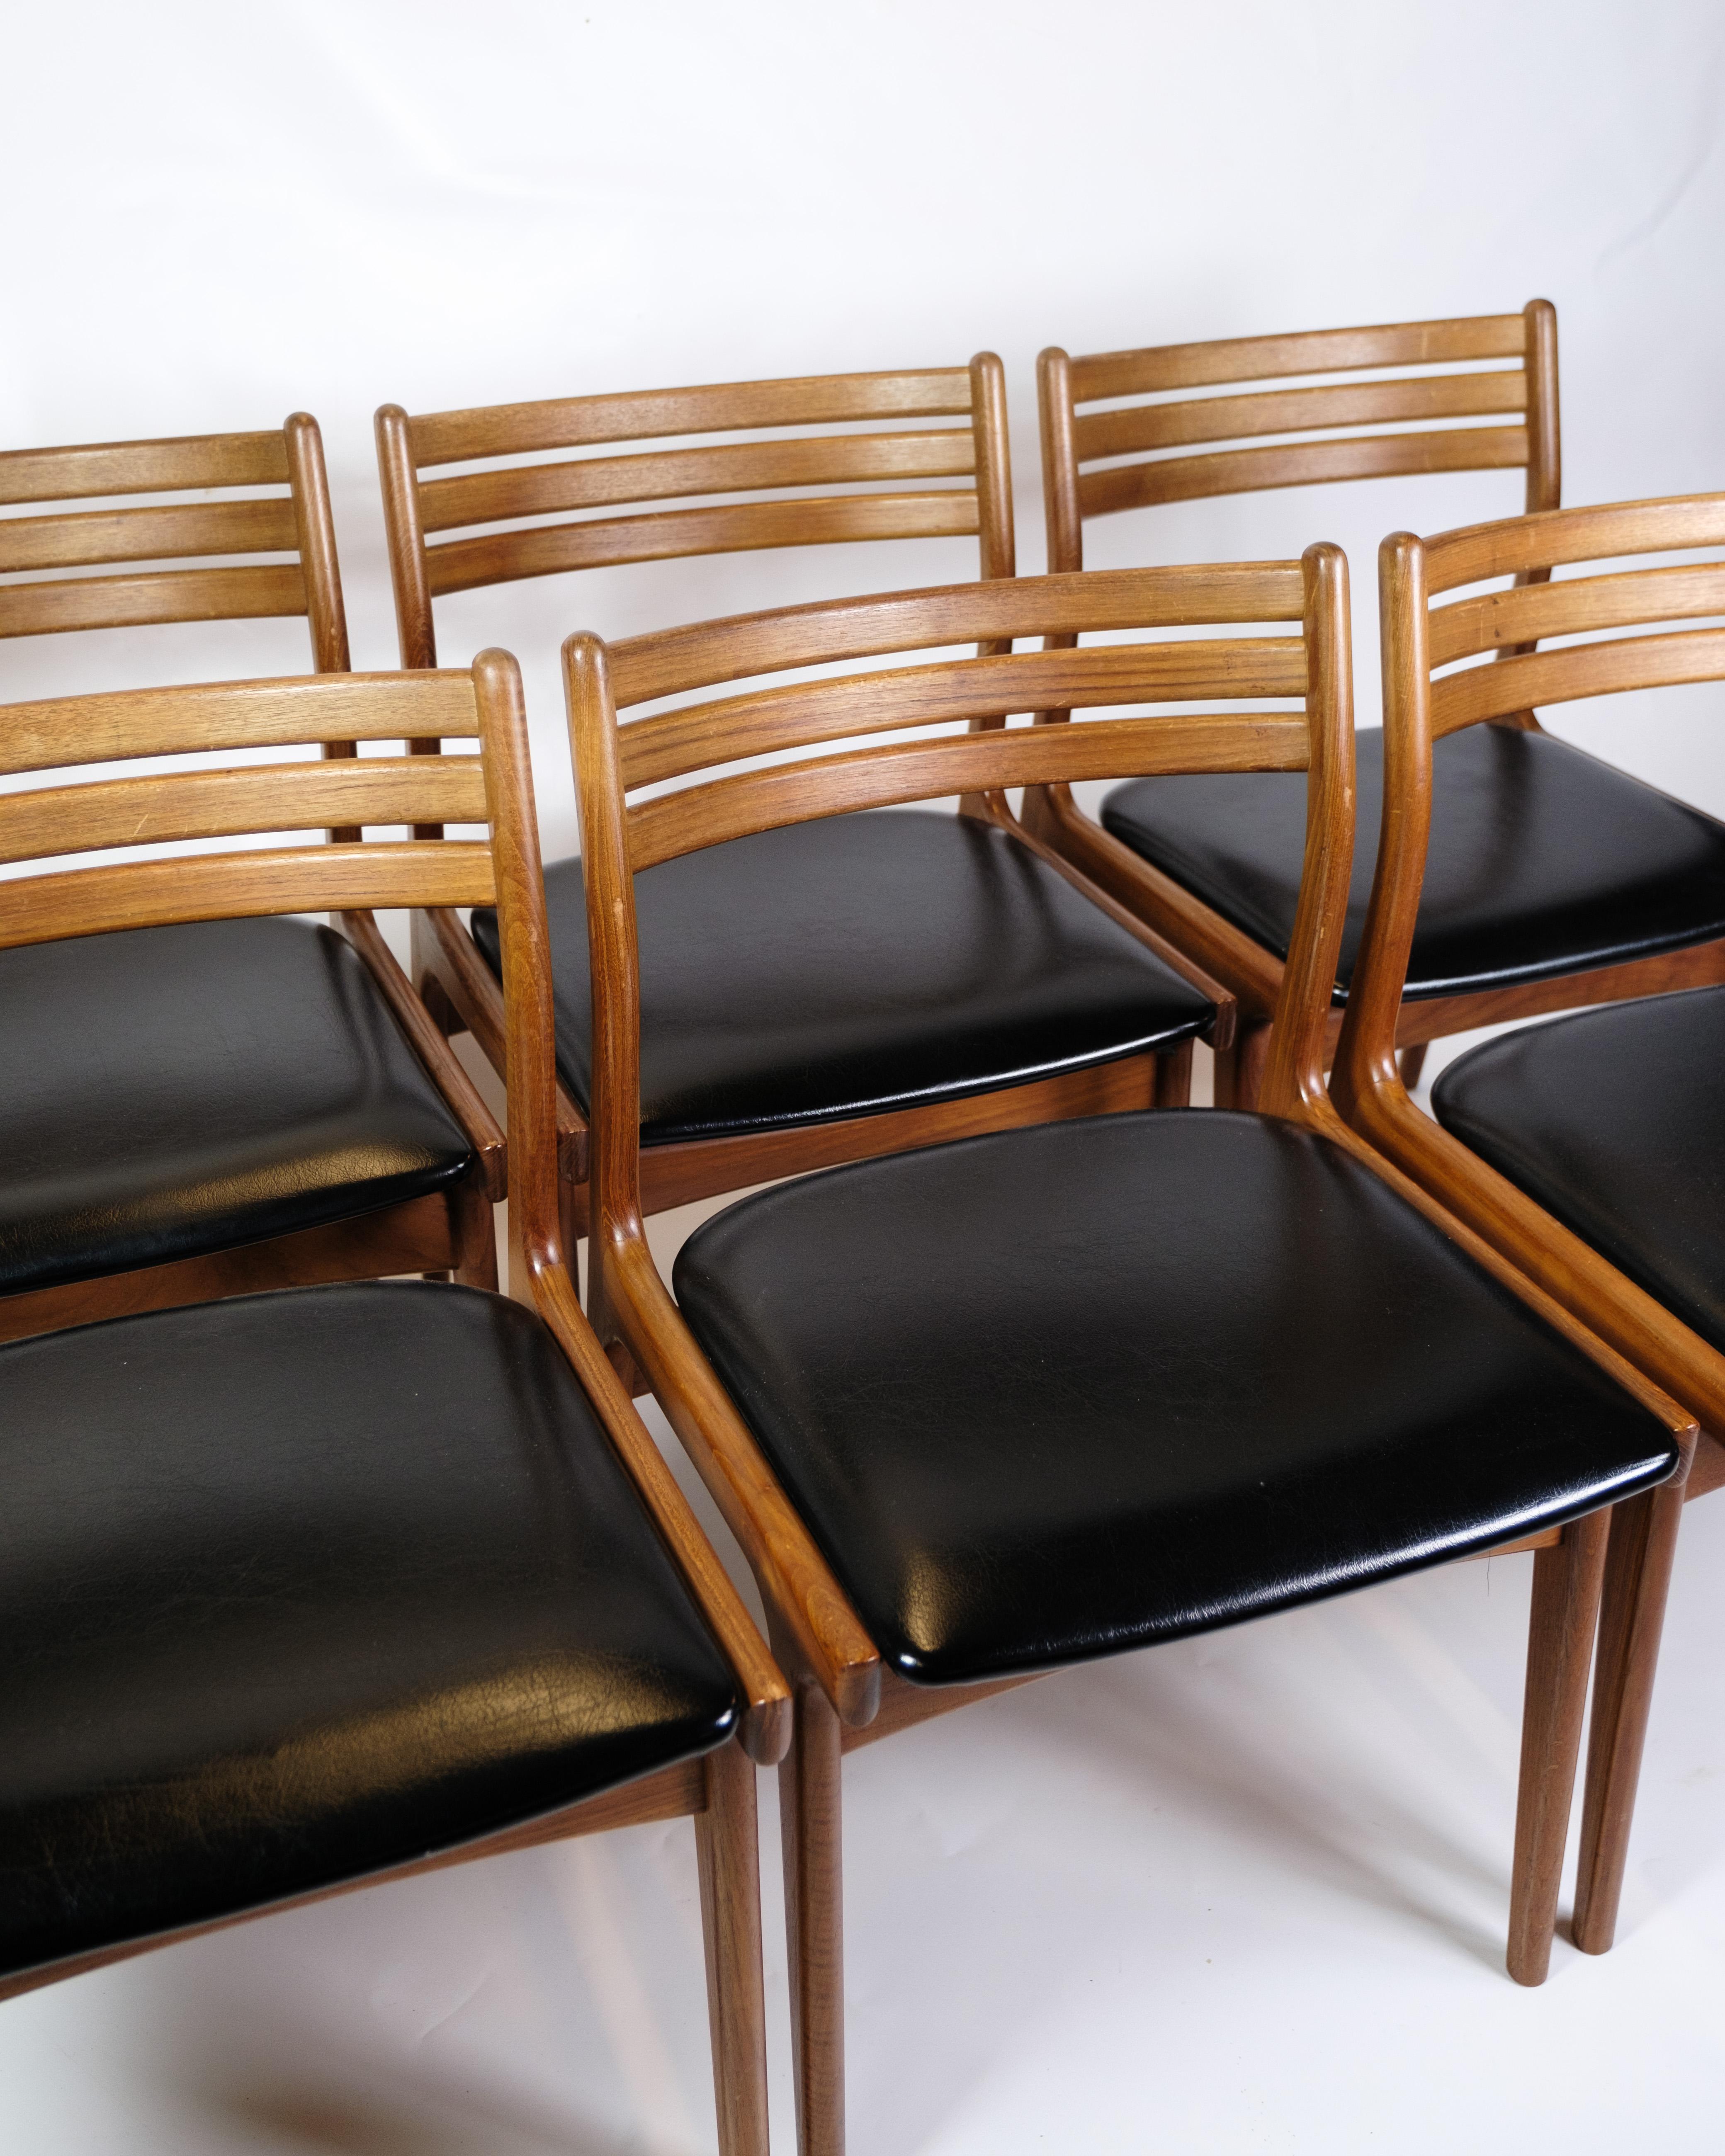 The set of six dining room chairs, model U20, is a splendid example of Danish design from the 1960s and bears the signatures of the renowned furniture designer Johannes Andersen and Uldum Møbelfabrik. These chairs are not only functional furniture,